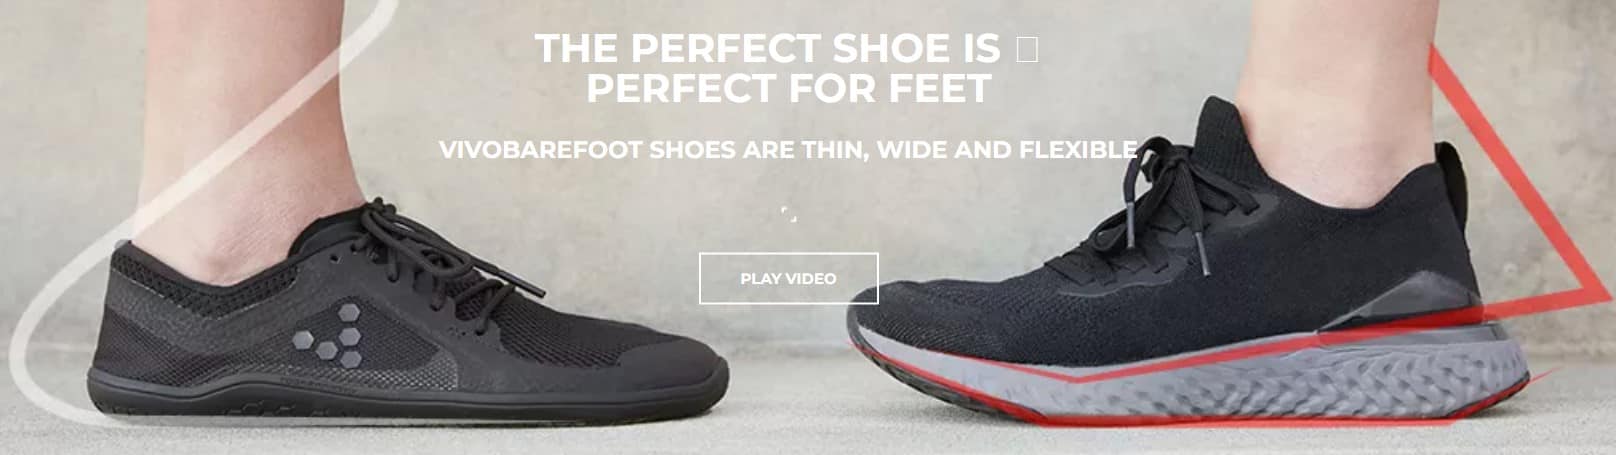 How to use Vivobarefoot promo code?